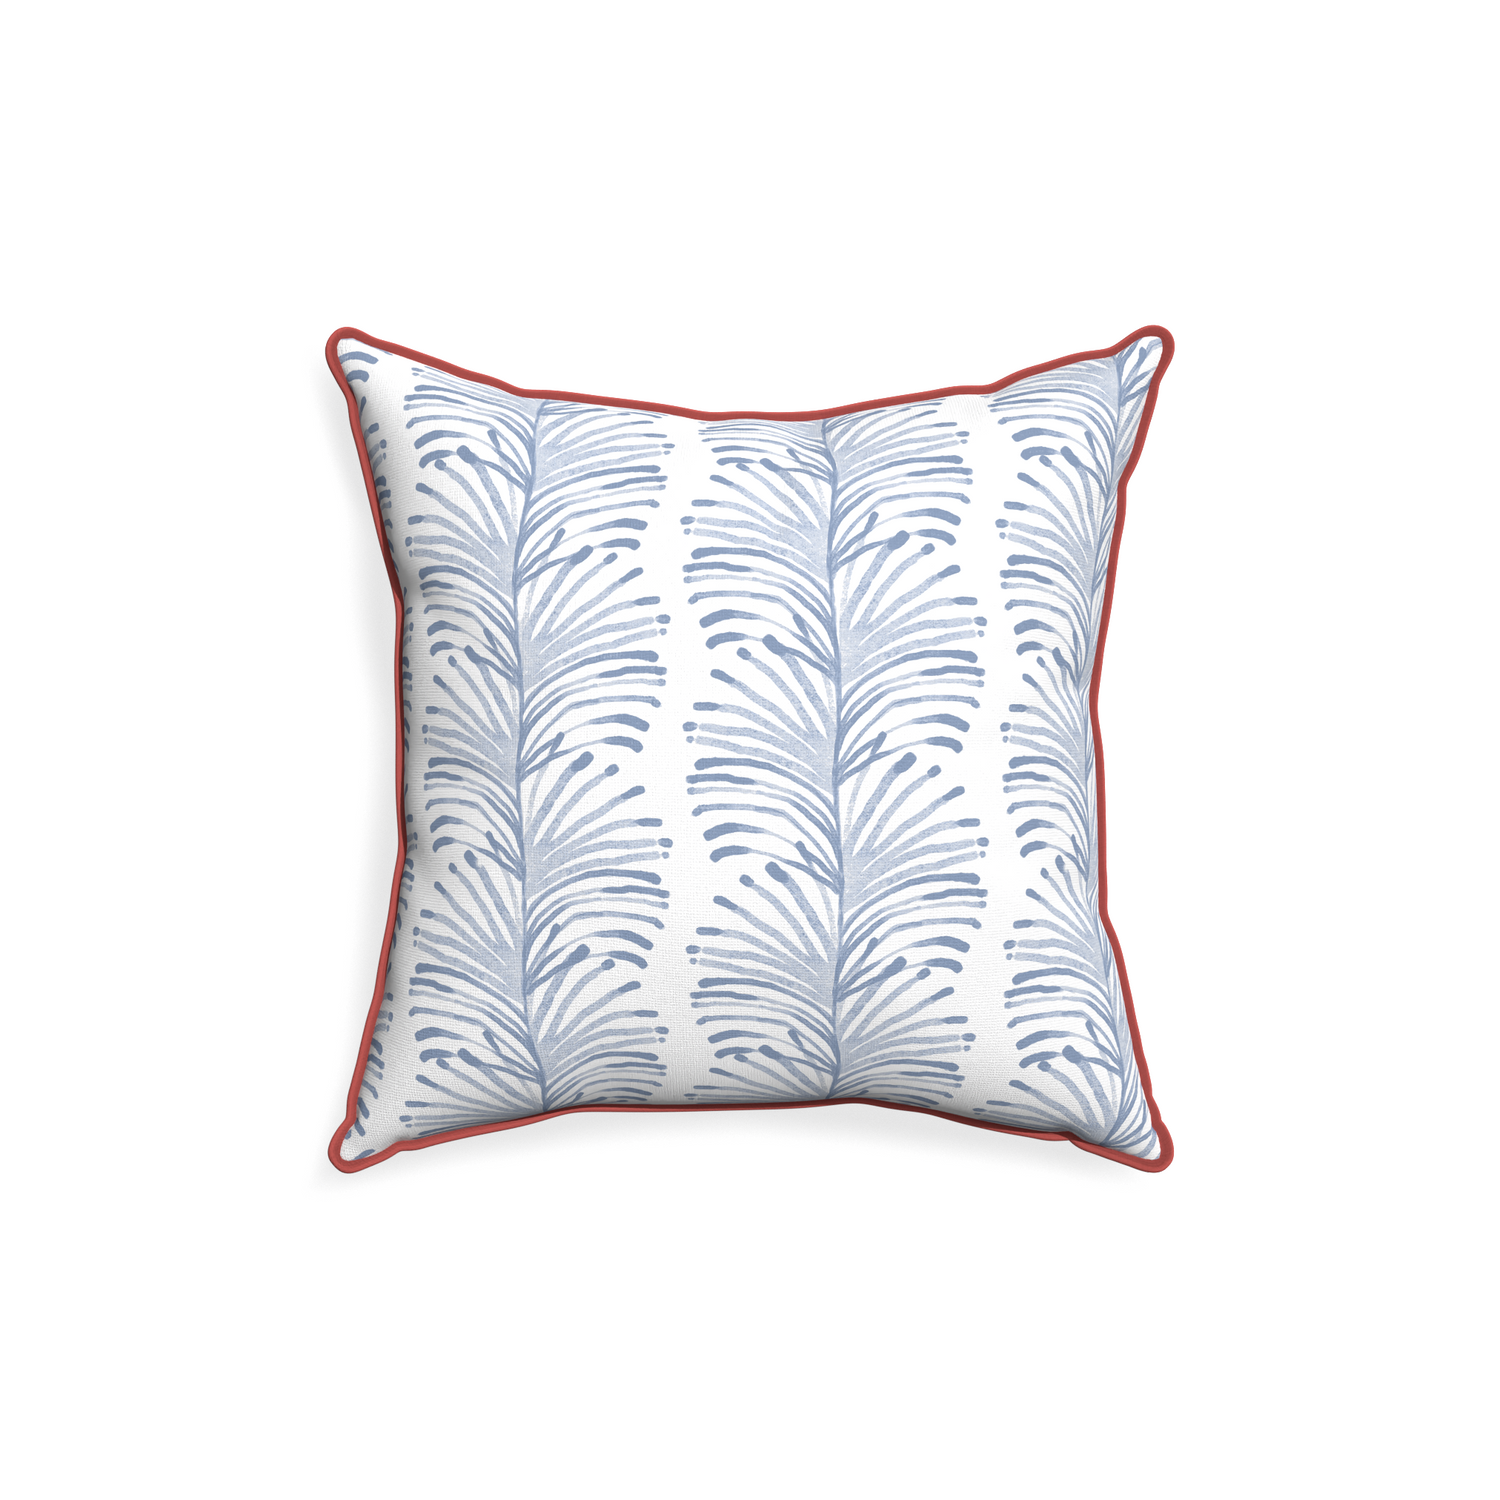 18-square emma sky custom pillow with c piping on white background